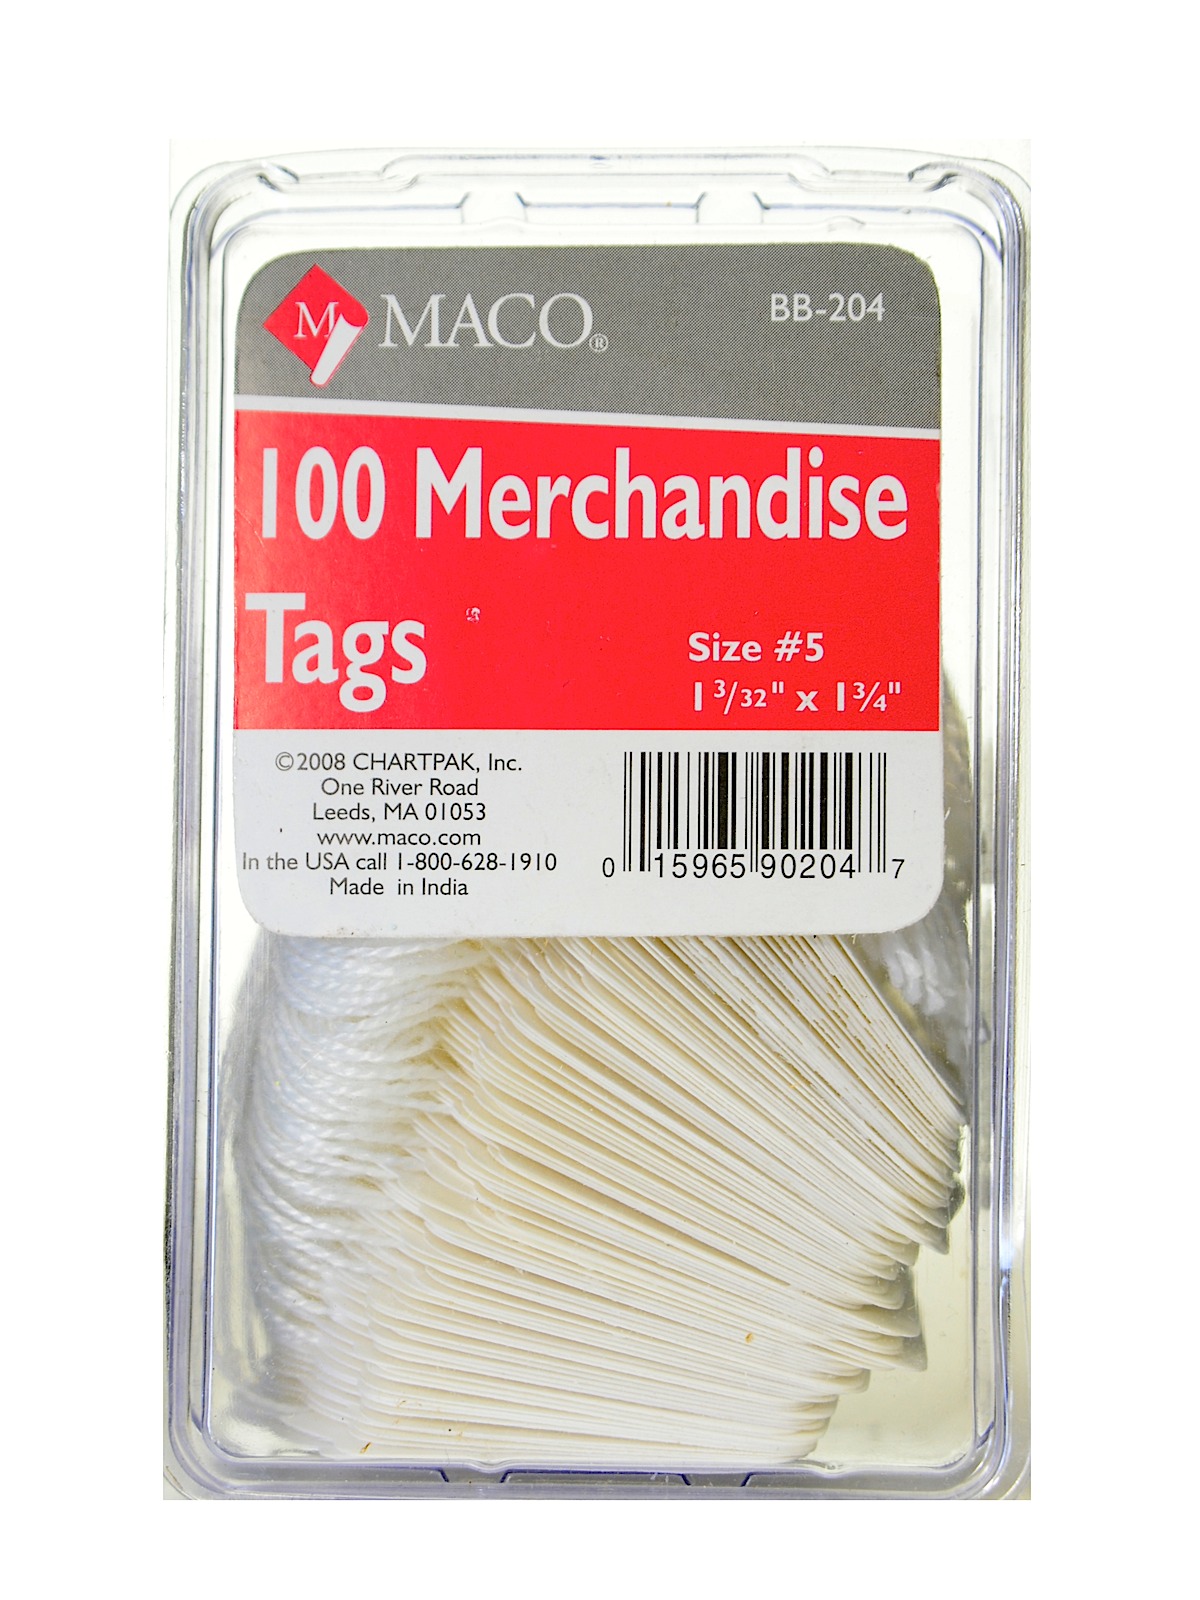 Merchandise Tags 1 3 32 In. X 1 3 4 In. Pack Of 100